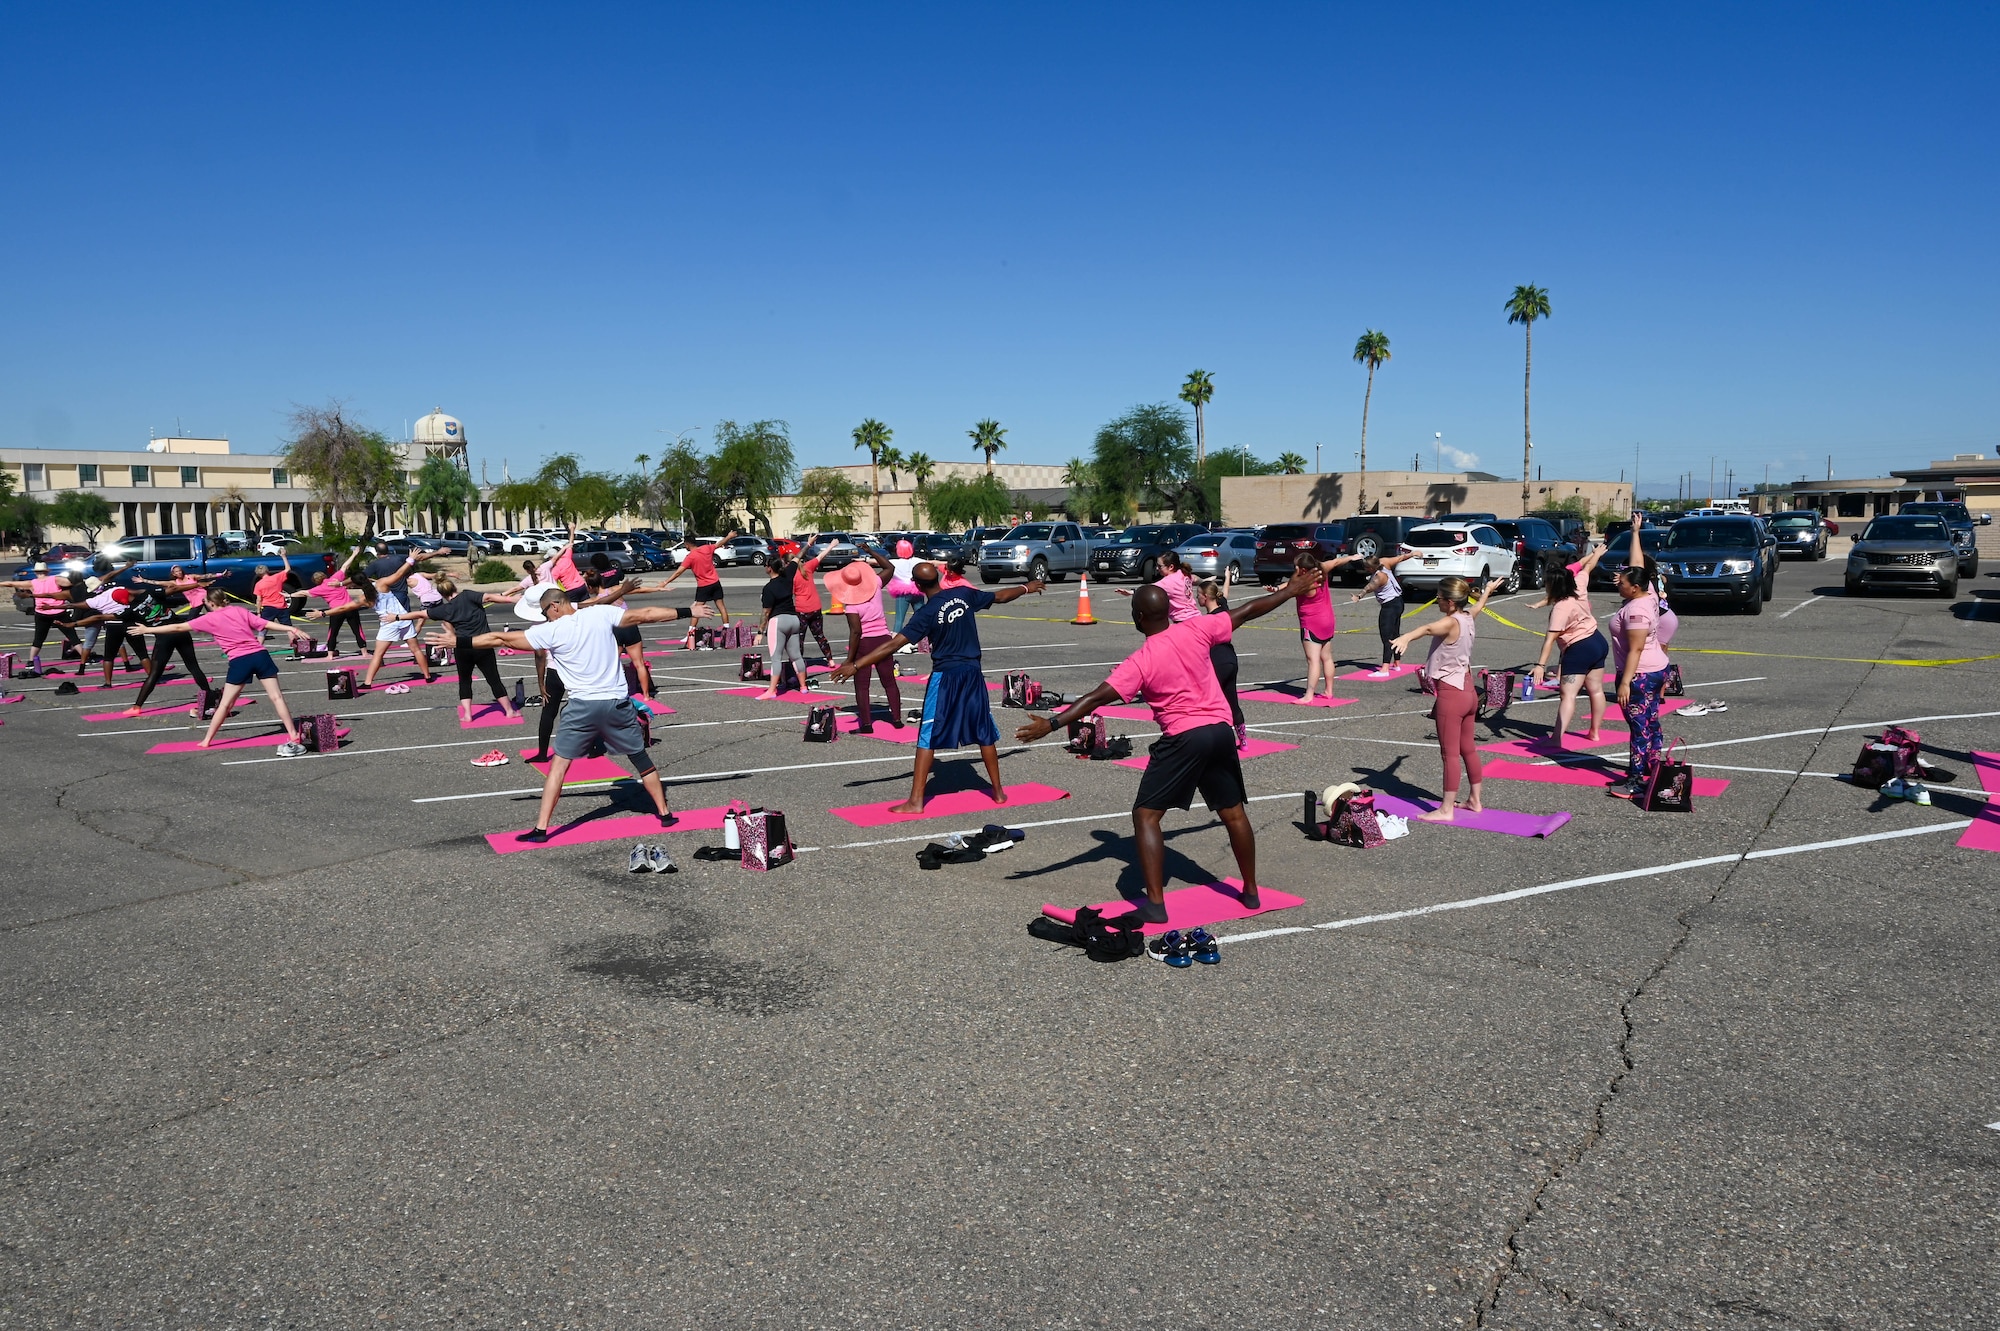 Members of the Luke Air Force Base community participate in a yoga session Oct. 5, 2022, at Luke Air Force Base, Arizona.